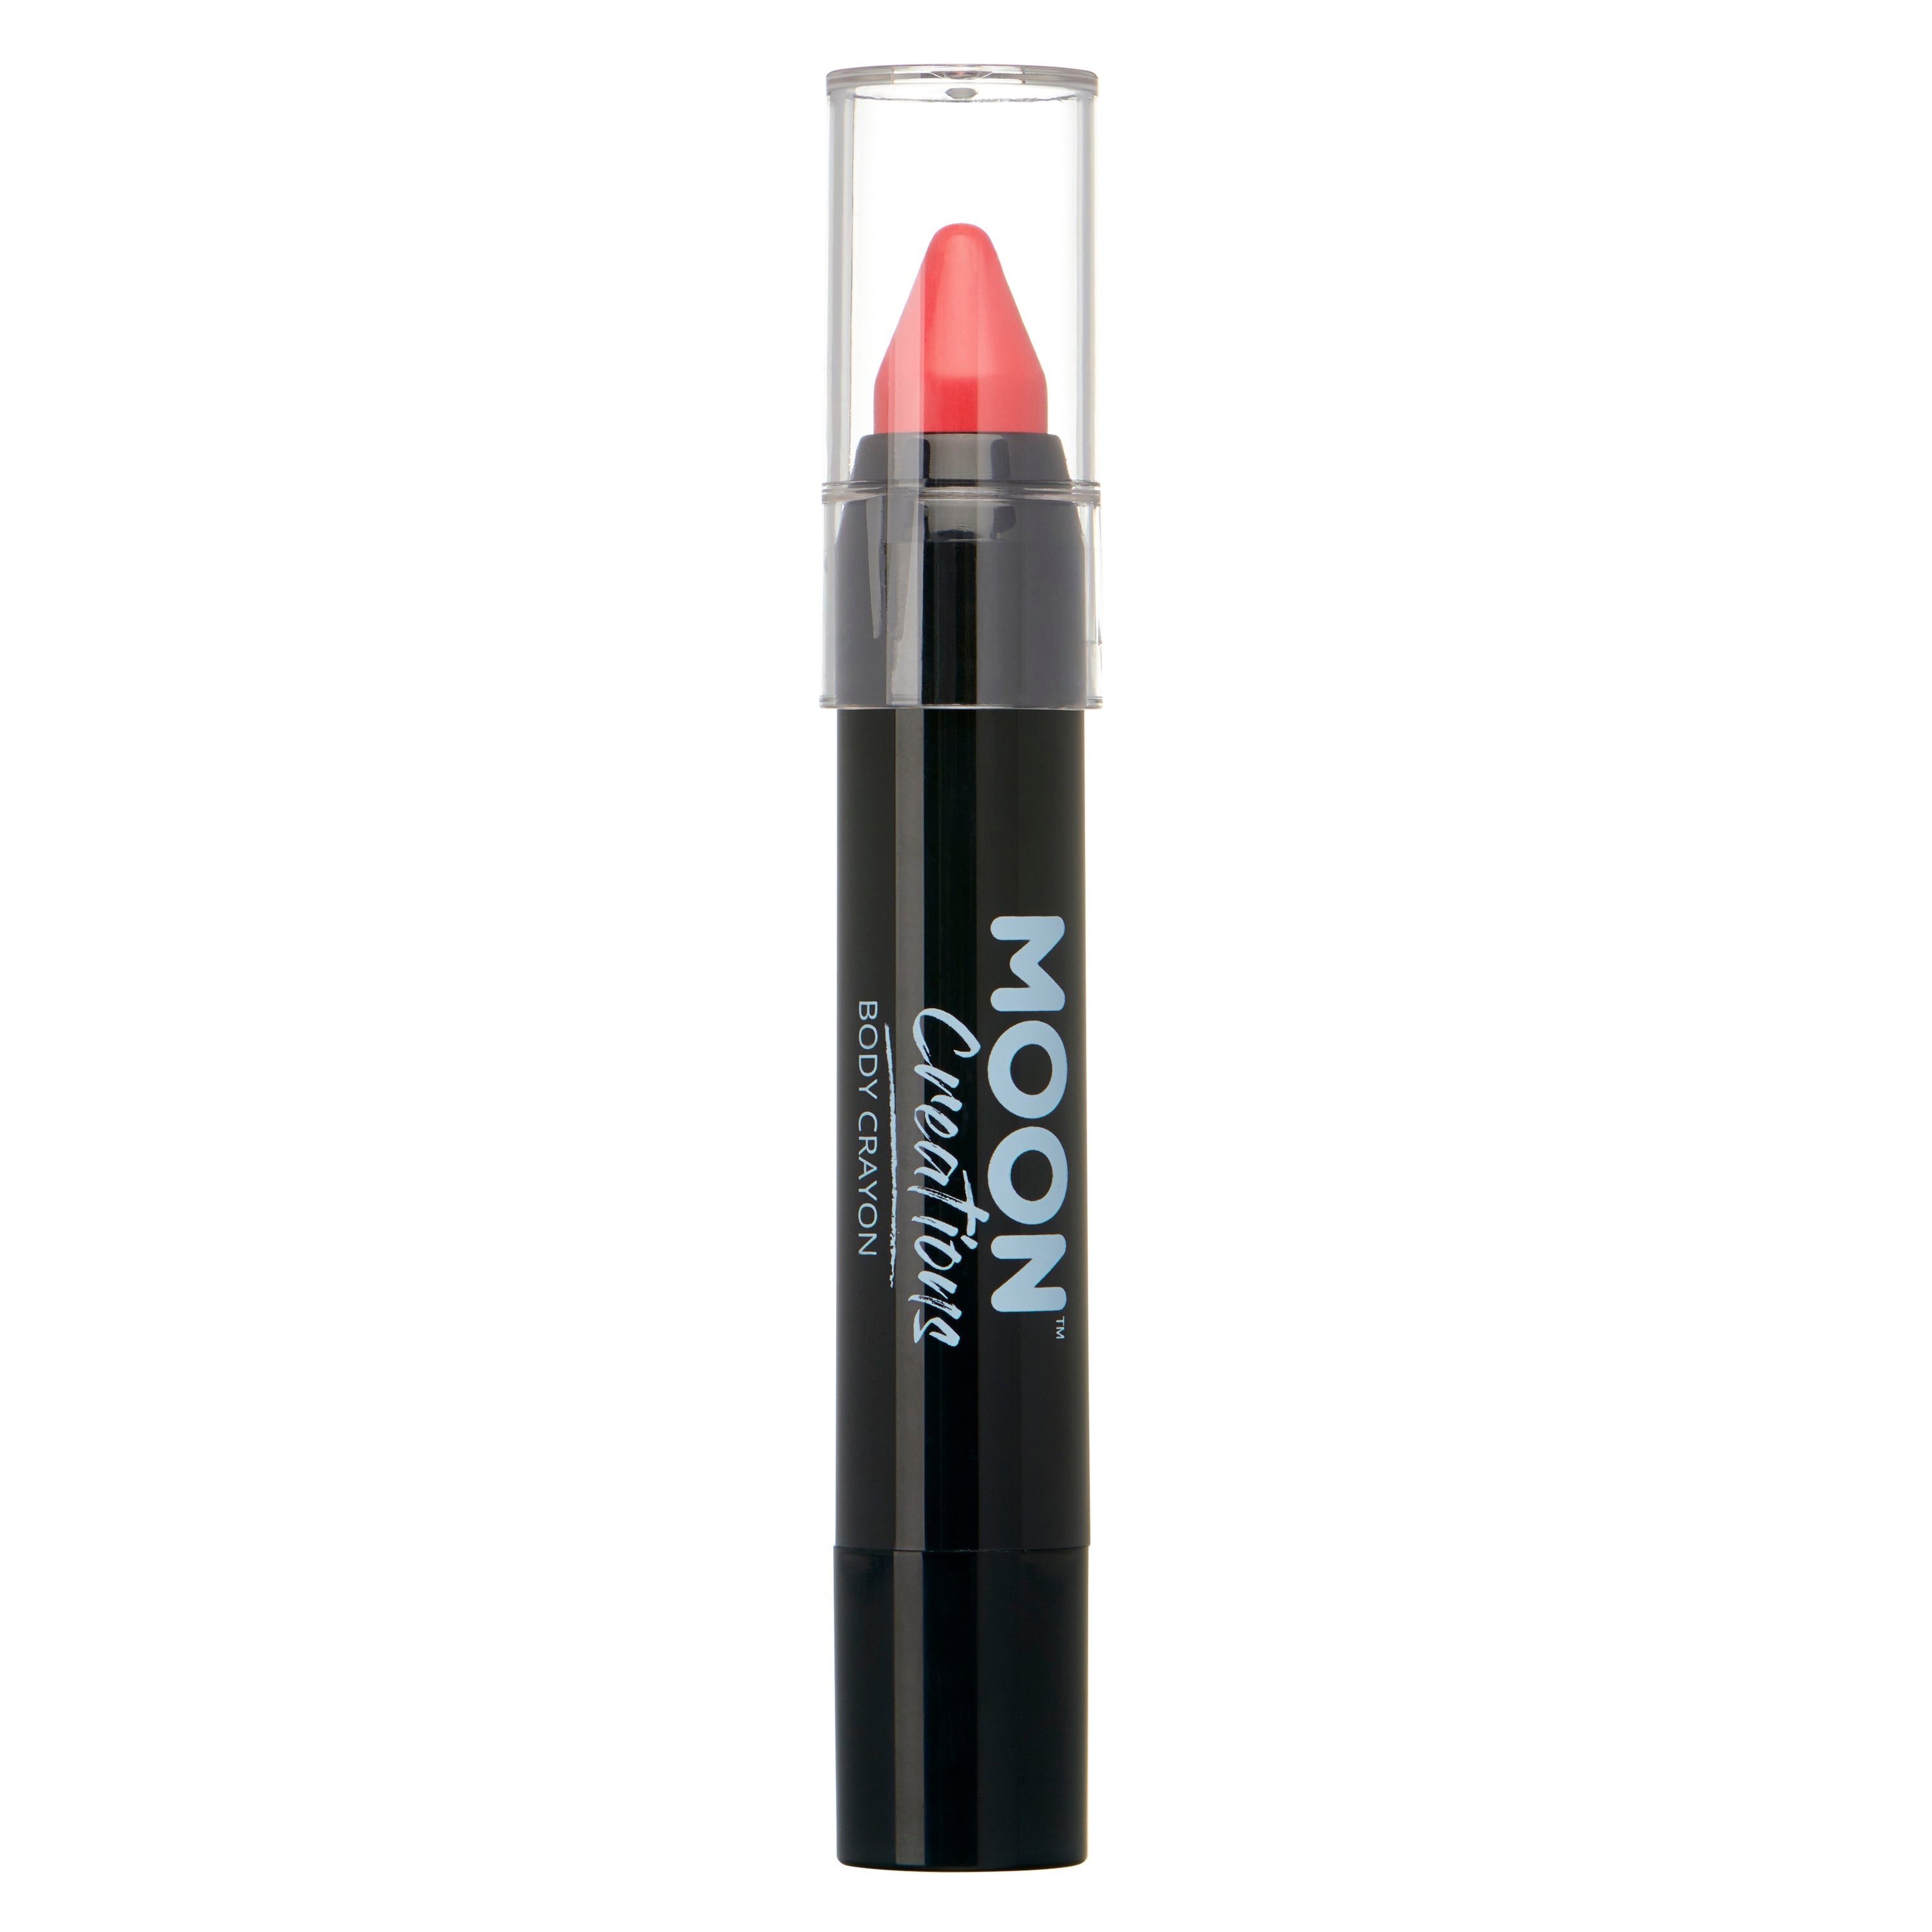 Bright Pink - Face & Body Crayon, 3.5g. Cosmetically certified, FDA & Health Canada compliant and cruelty free.